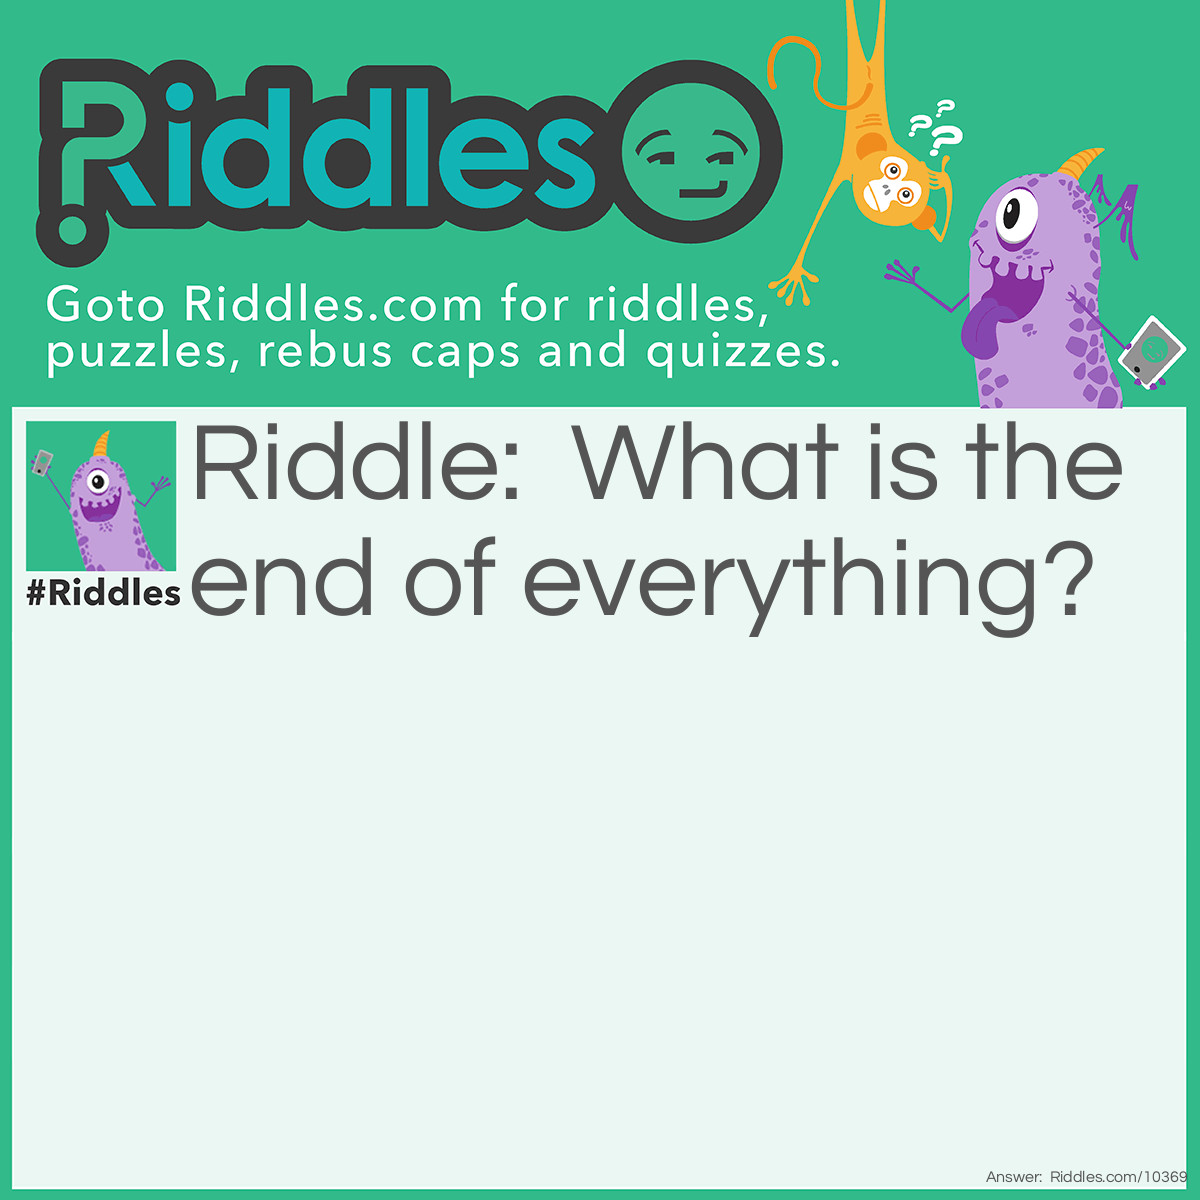 Riddle: What is the end of everything? Answer: The letter G.